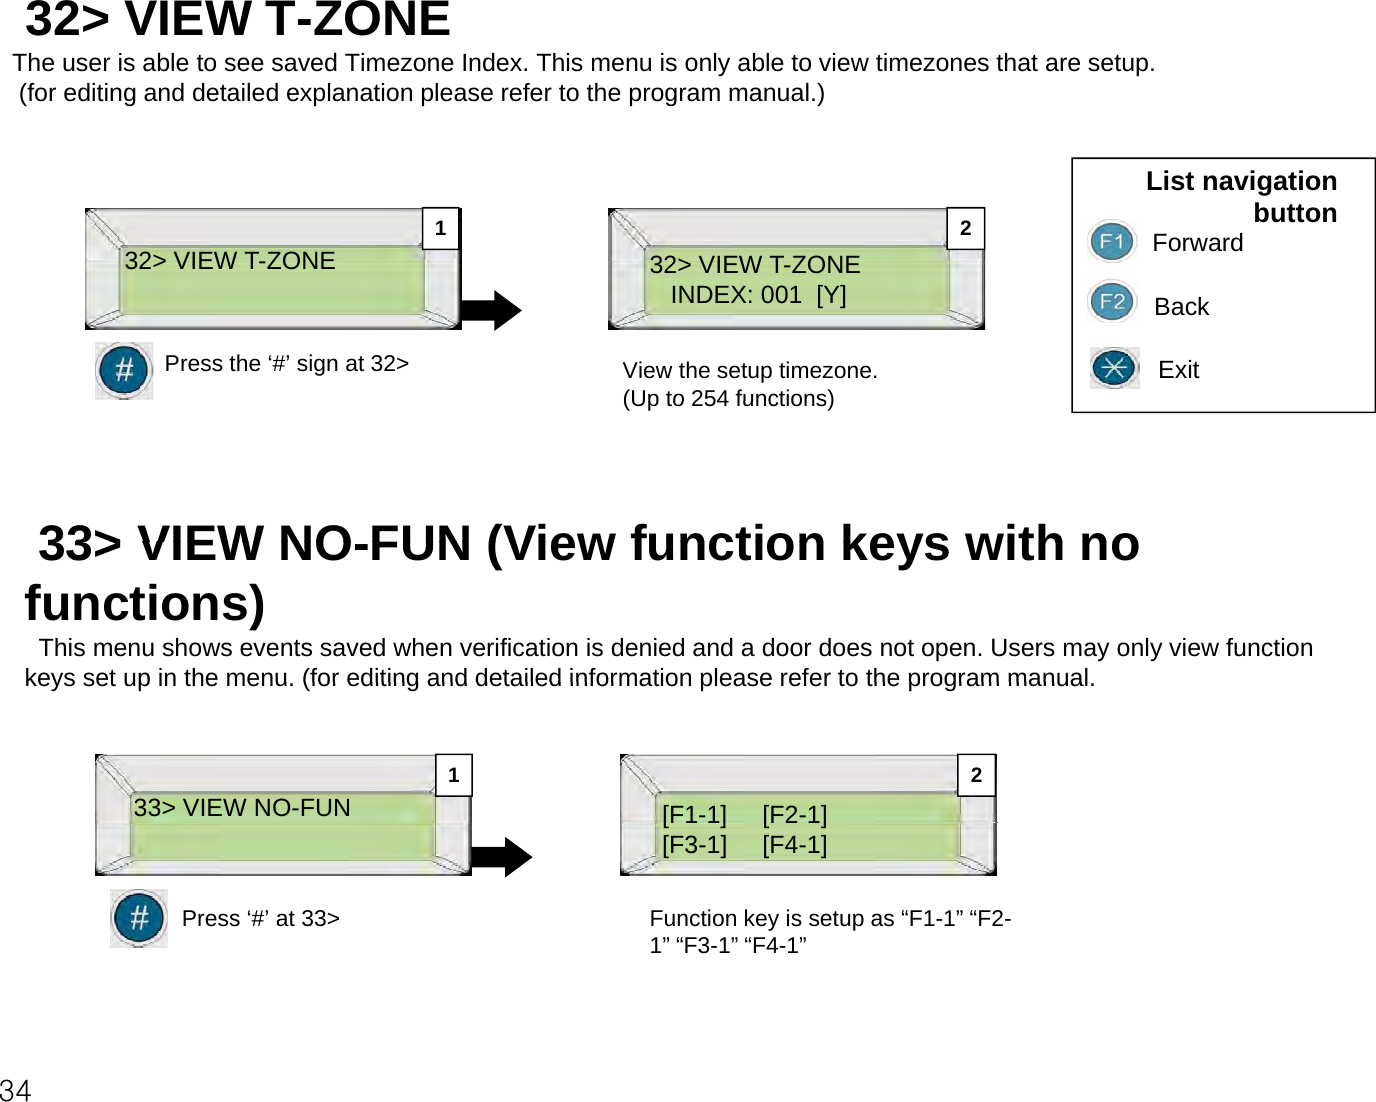 32&gt; VIEW T-ZONE The user is able to see saved Timezone Index. This menu is only able to view timezones that are setup.(for editing and detailed explanation please refer to the program manual.)32&gt; VIEW TZONE32&gt; VIEW TZONEList navigation buttonForward1 232&gt; VIEW T-ZONEPress the ‘#’ sign at 32&gt;32&gt; VIEW T-ZONEINDEX: 001  [Y] BackExitView the setup timezone.(Up to 254 functions)(Up to 254 functions)33&gt; VIEW NOFUN (View function keys with no33&gt; VIEW NO-FUN (View function keys with no functions)This menu shows events saved when verification is denied and a door does not open. Users may only view function keys set up in the menu (for editing and detailed information please refer to the program manualkeys set up in the menu. (for editing and detailed information please refer to the program manual.33&gt; VIEW NO-FUN[F1-1] [F2-1]21Press ‘#’ at 33&gt;[F11]     [F21][F3-1]     [F4-1]Function key is setup as “F1-1” “F2-1” “F3-1” “F4-1”34